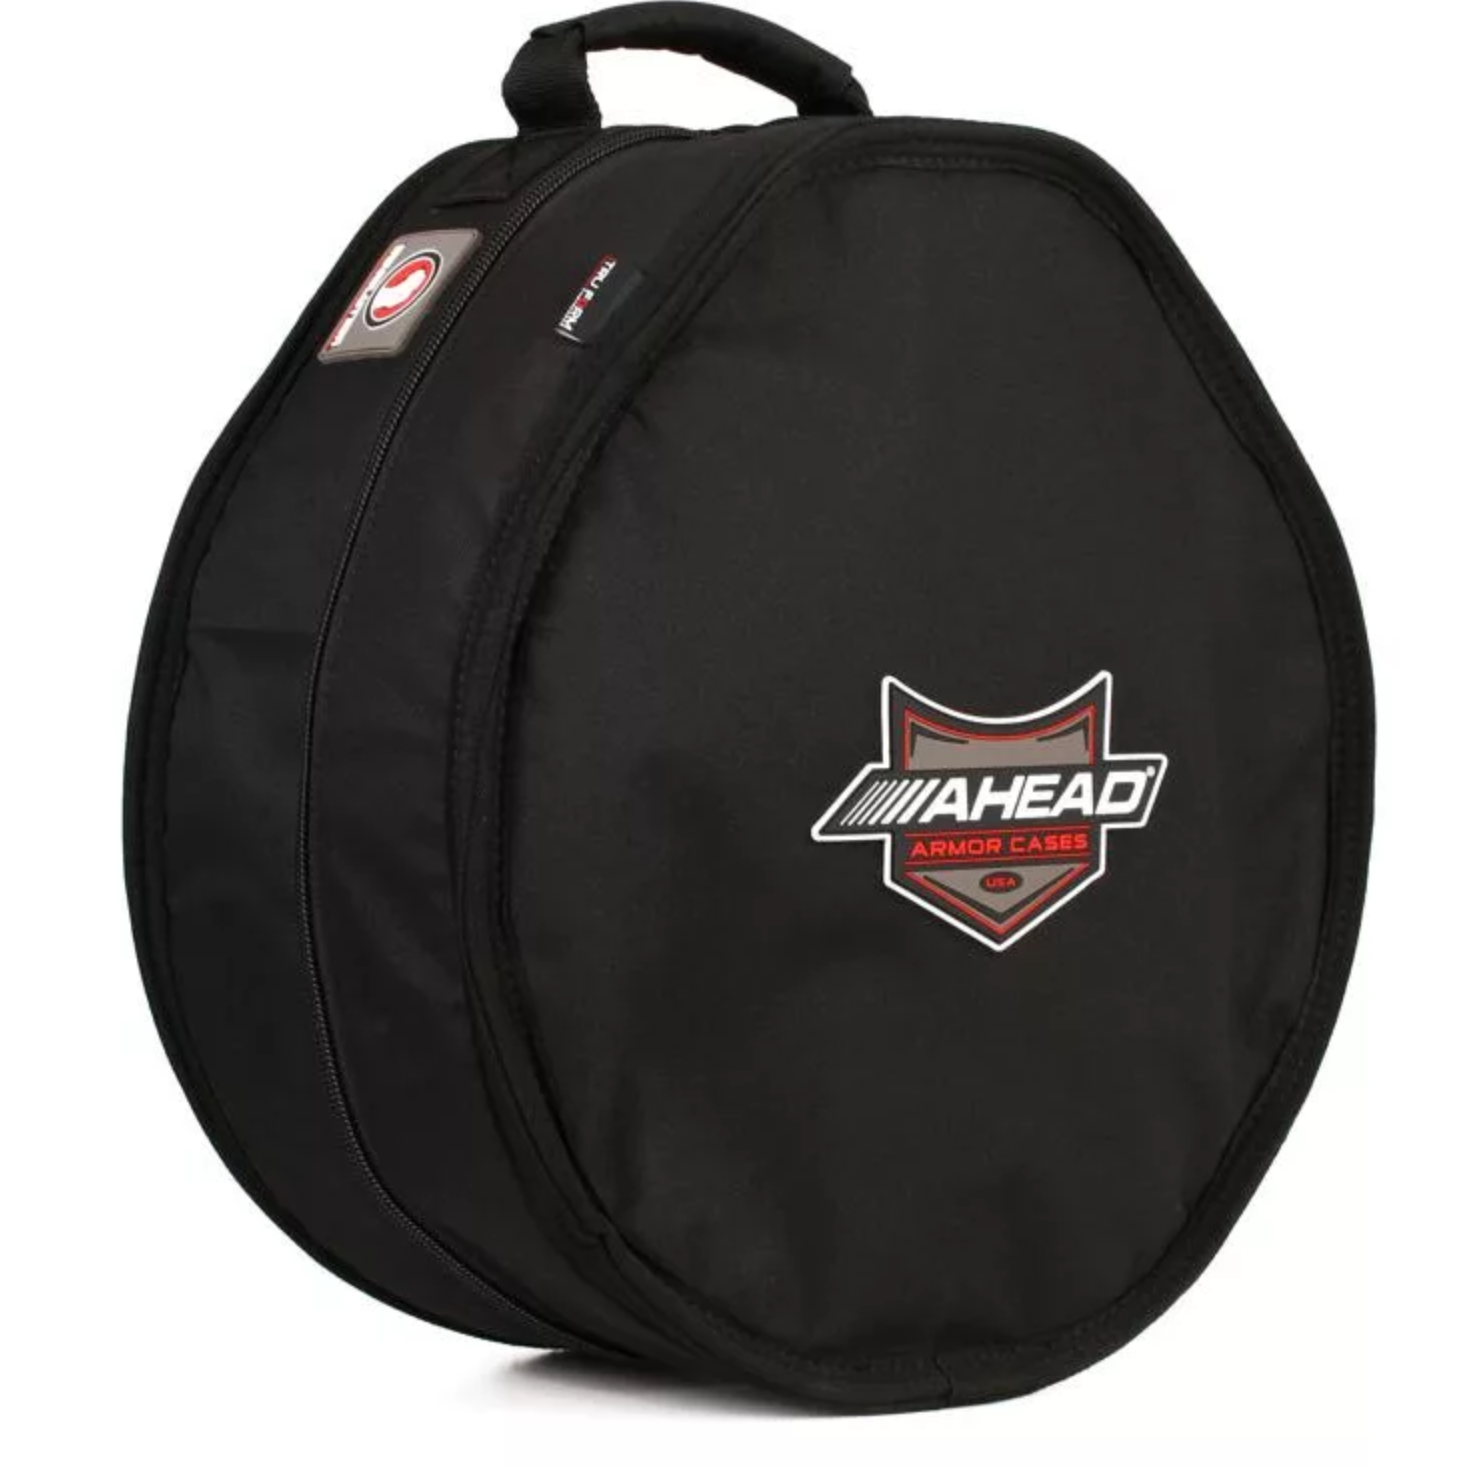 What snare case or bag fits dialtune's 6.5x14" drums?